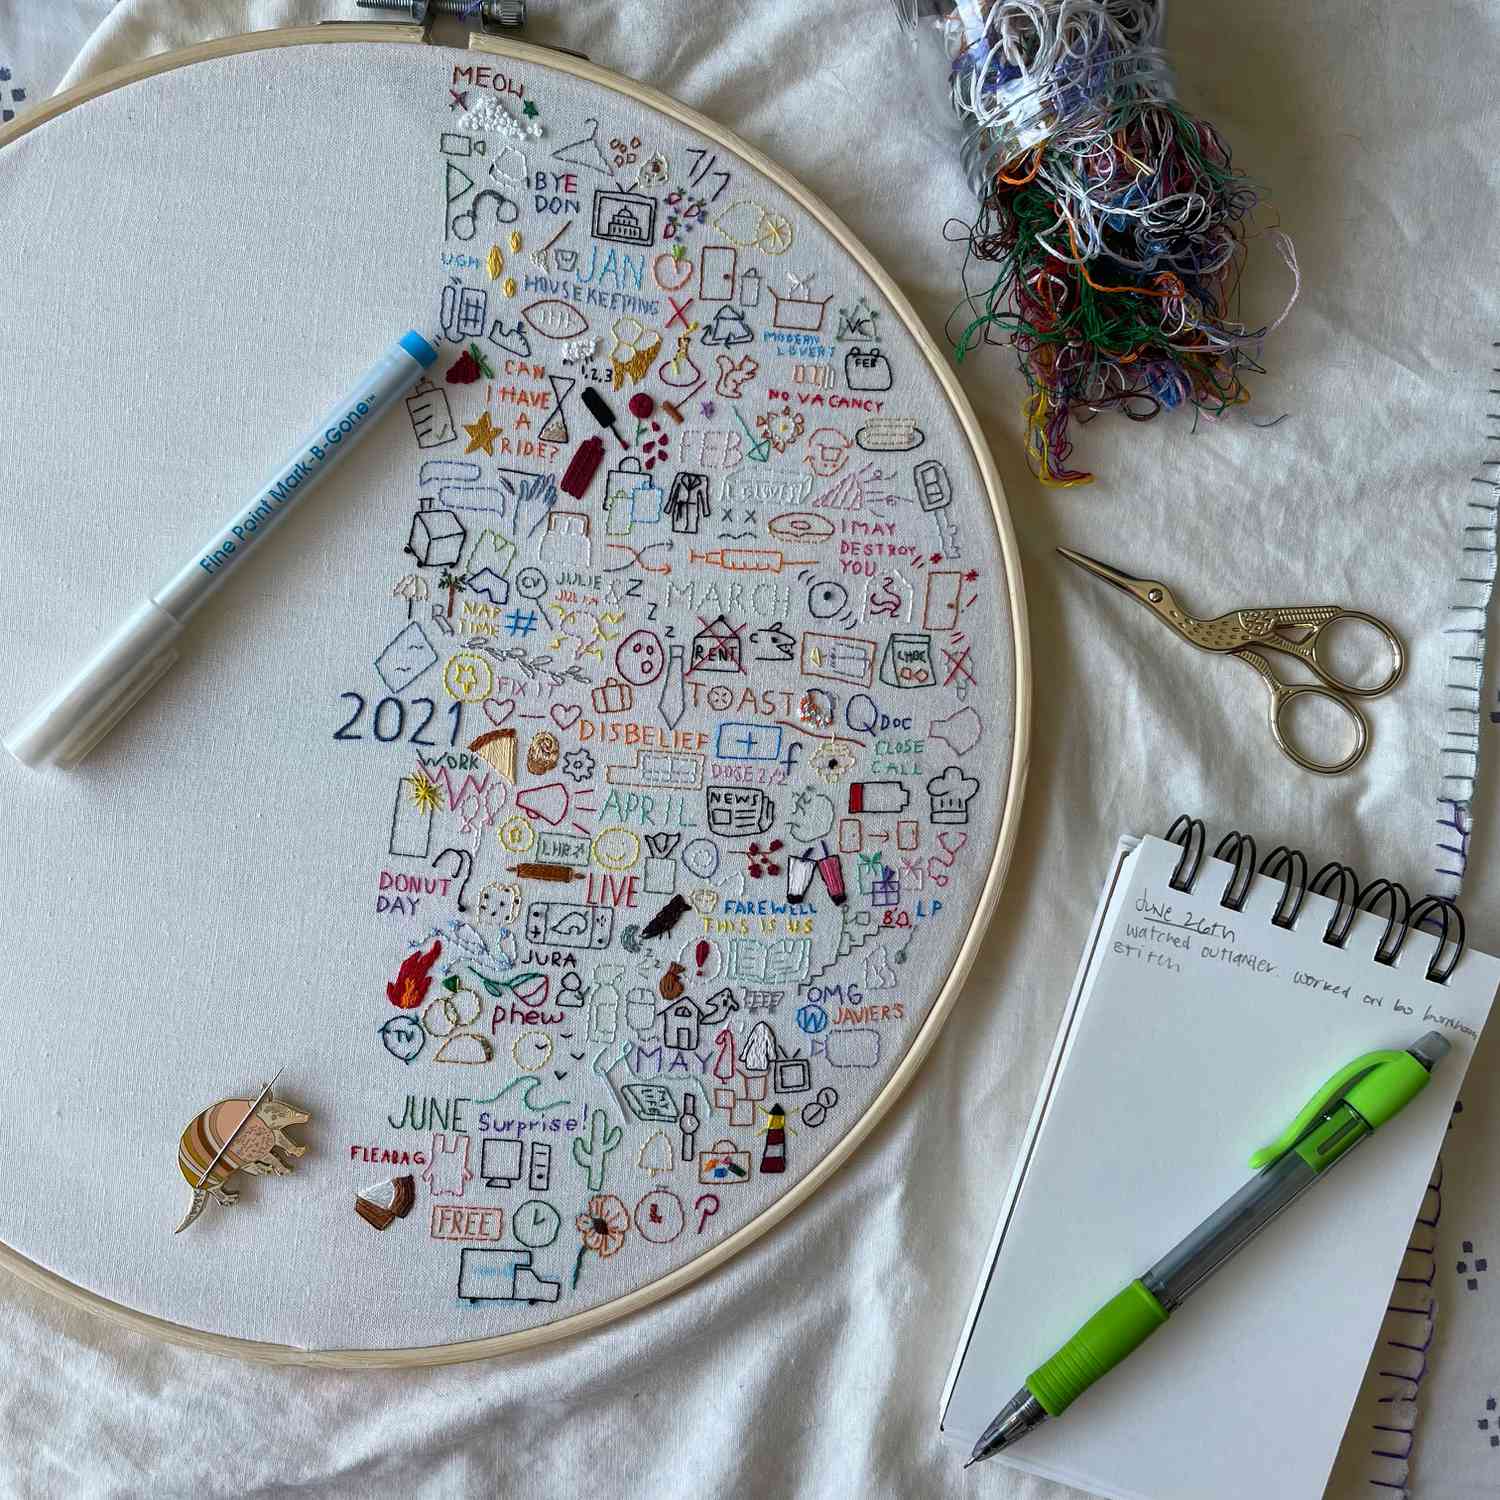 Embroidery journaling with a few months' progress (June 2021 update)